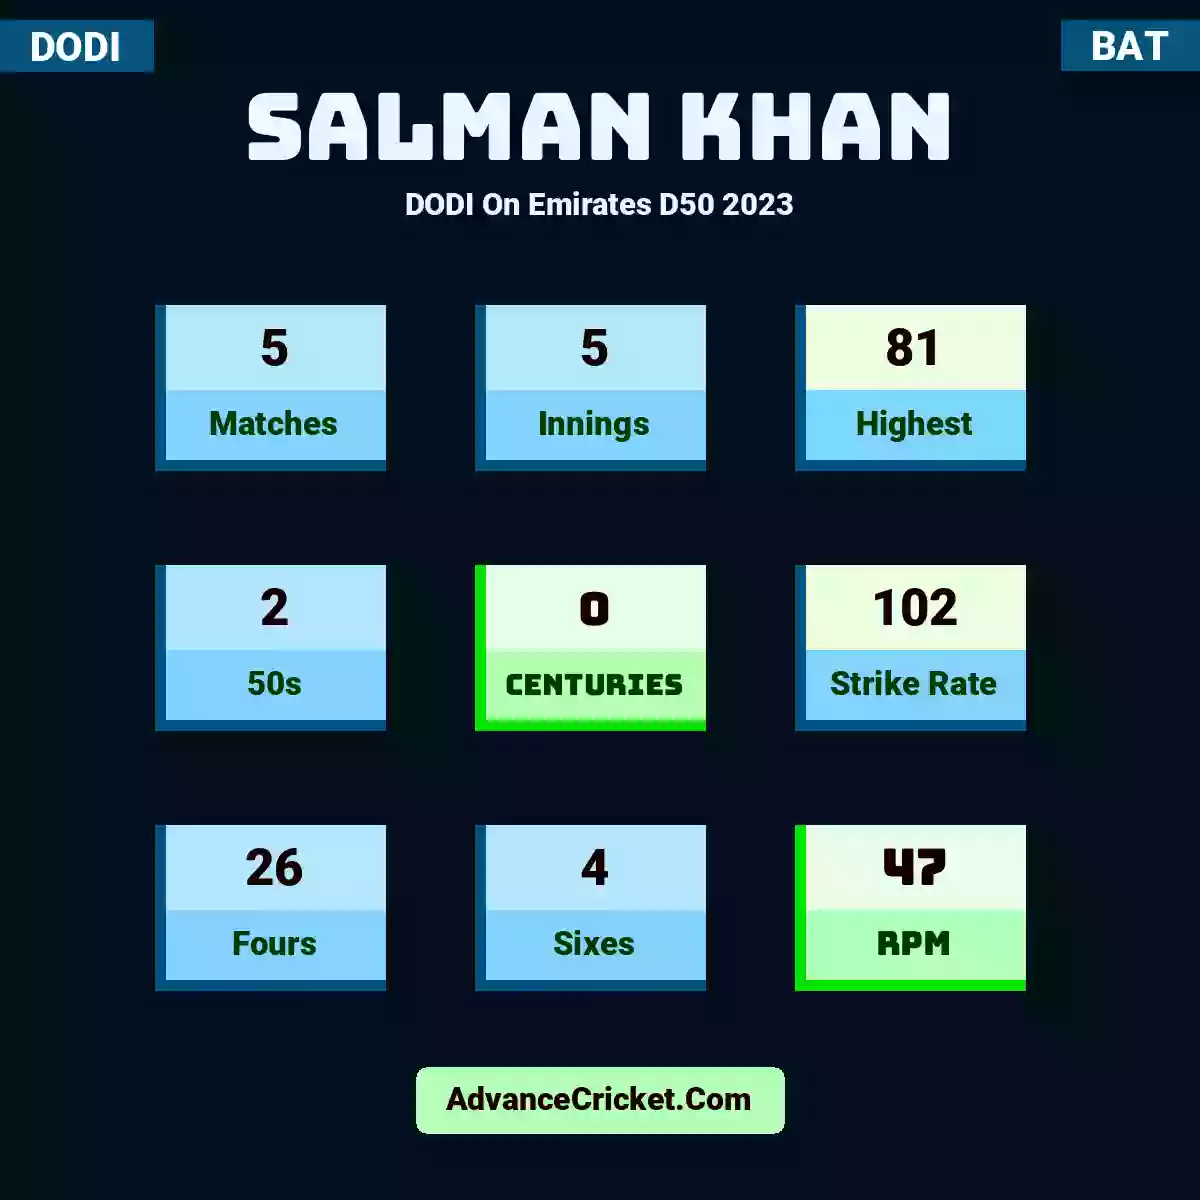 Salman Khan DODI  On Emirates D50 2023, Salman Khan played 5 matches, scored 81 runs as highest, 2 half-centuries, and 0 centuries, with a strike rate of 102. S.Khan hit 26 fours and 4 sixes, with an RPM of 47.